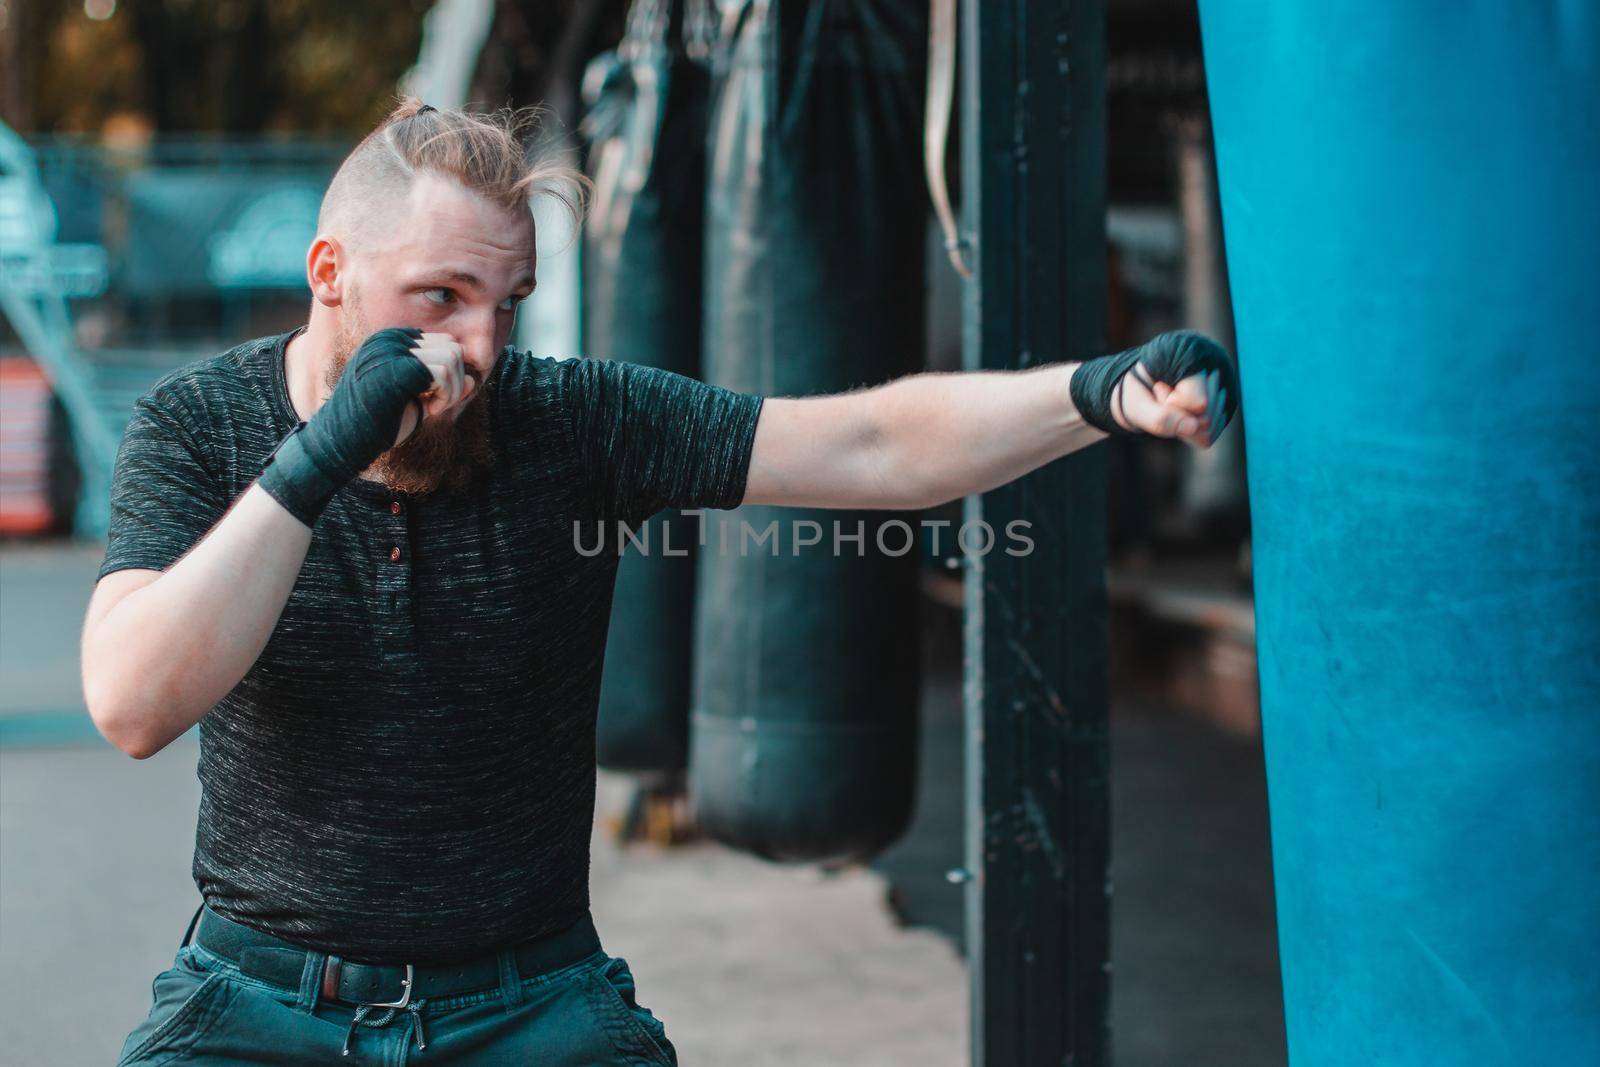 Street Fighter in Black Clothes and Bandages on the Wrist Boxing in Punching Bag Outdoors. Young Man Doing Box Training and Practicing His Punches at the Outside Gym